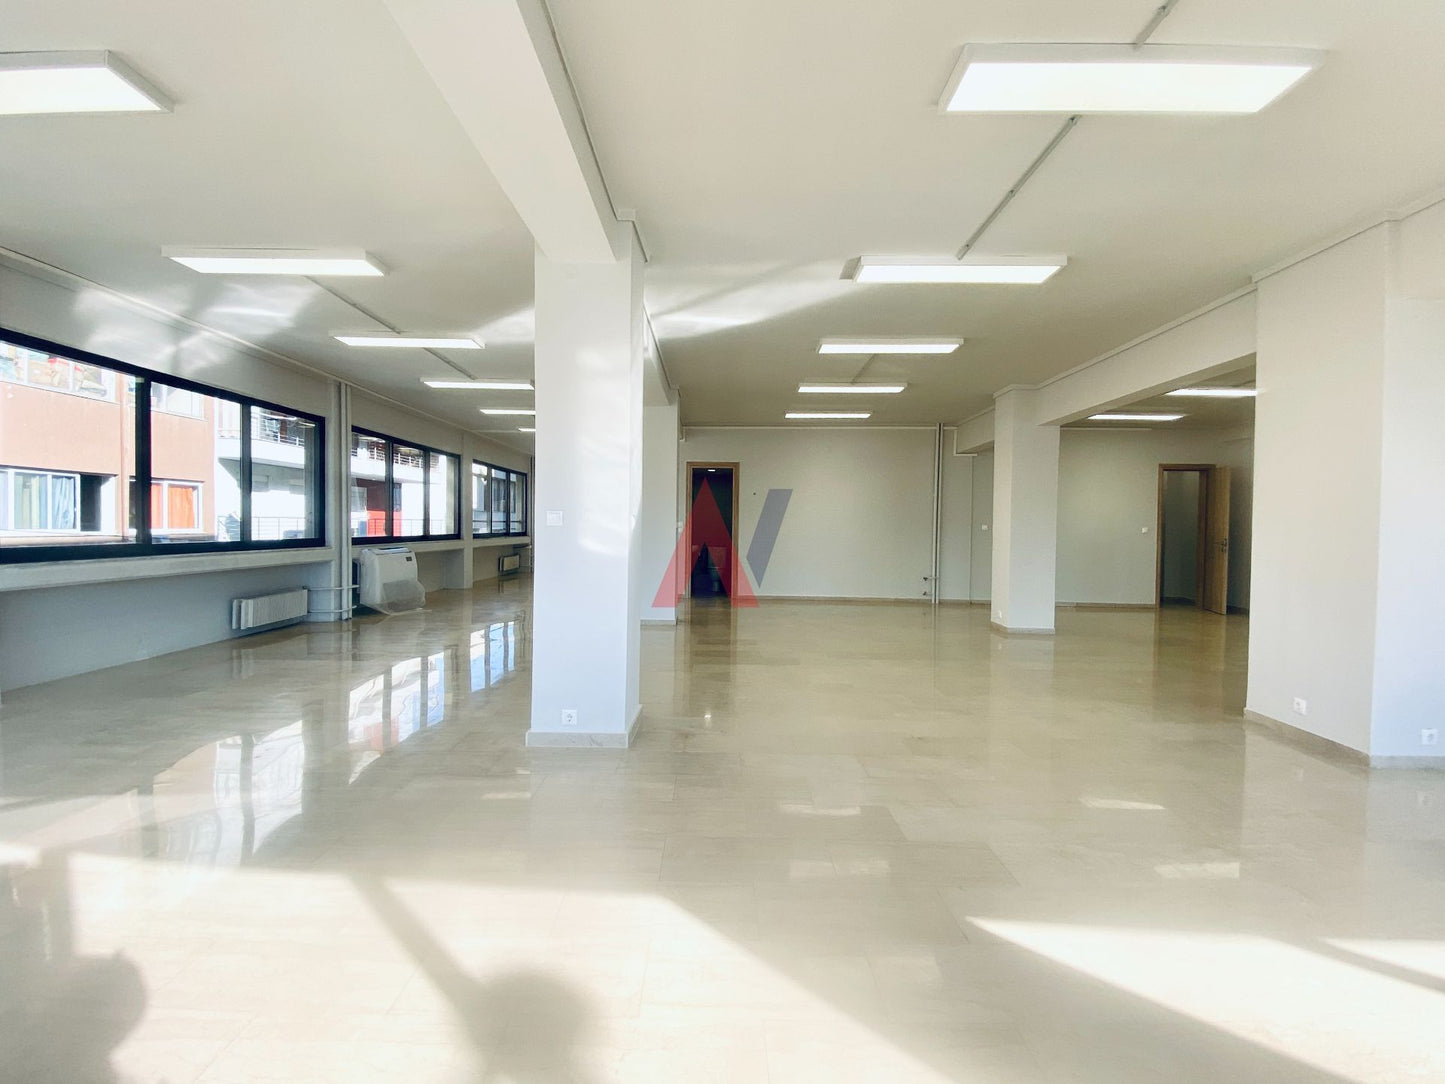 Office for rent 310sqm One Salonica Center Thessaloniki 